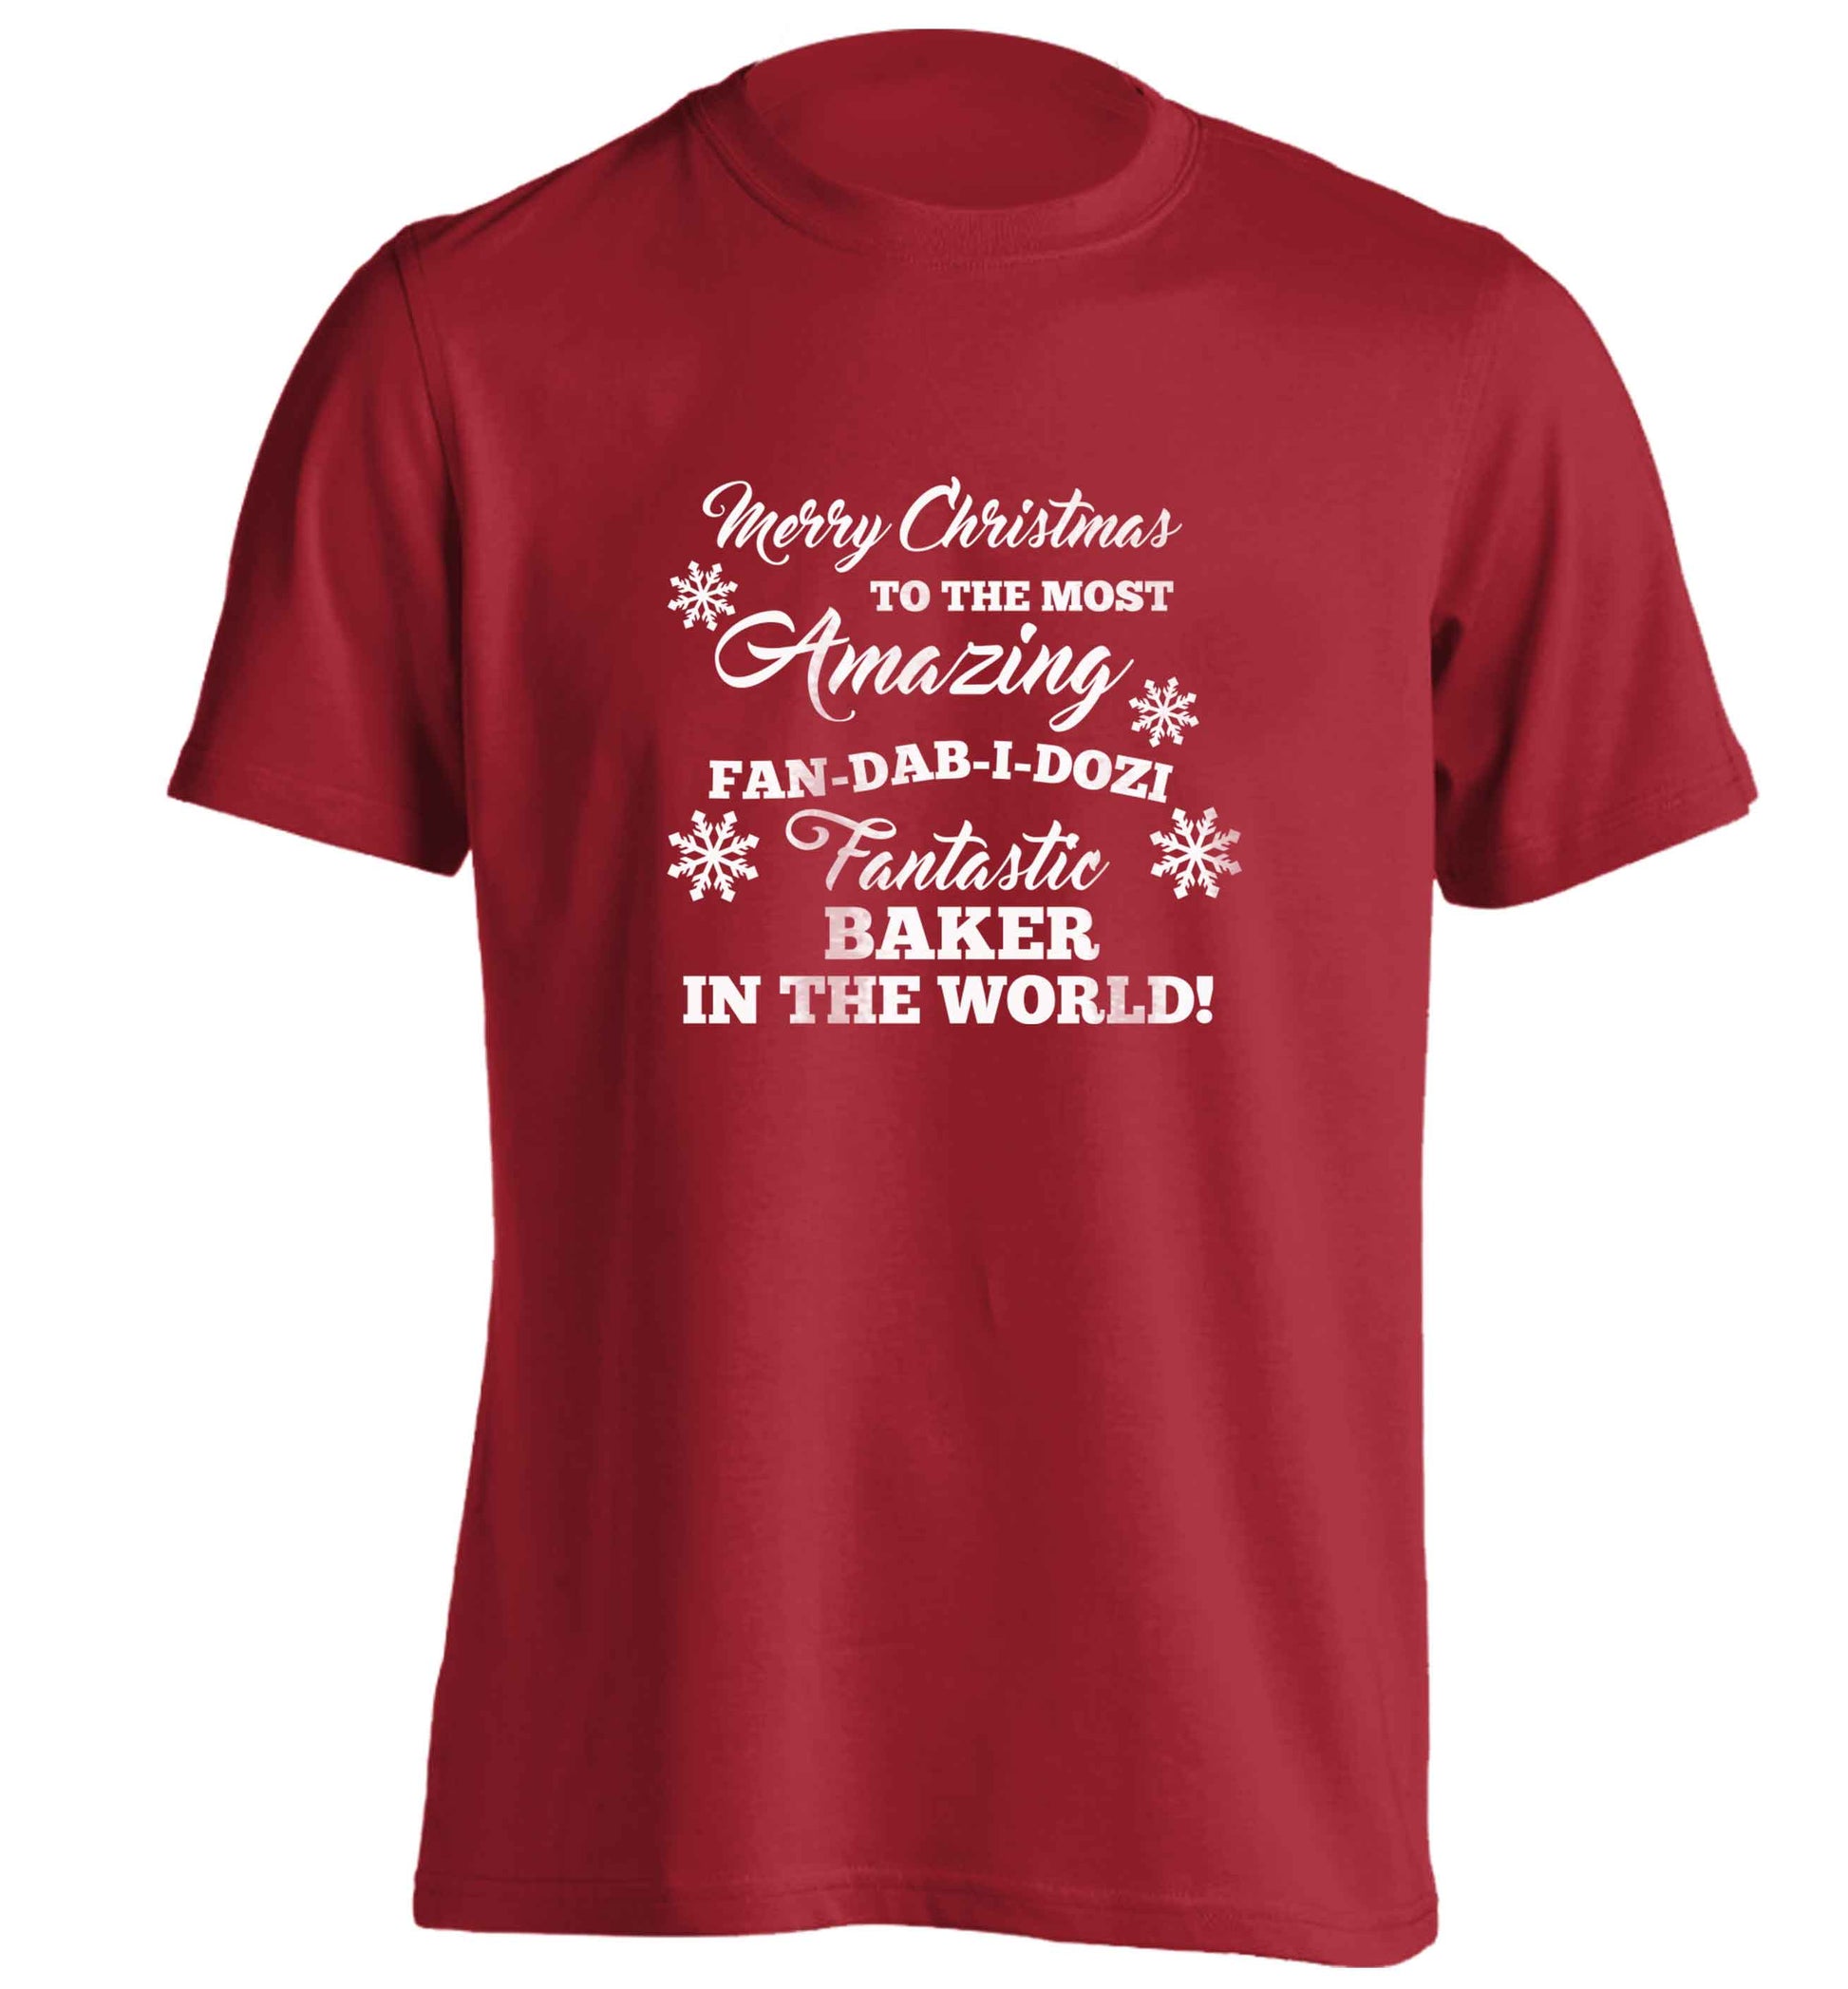 Merry Christmas to the most amazing baker in the world! adults unisex red Tshirt 2XL